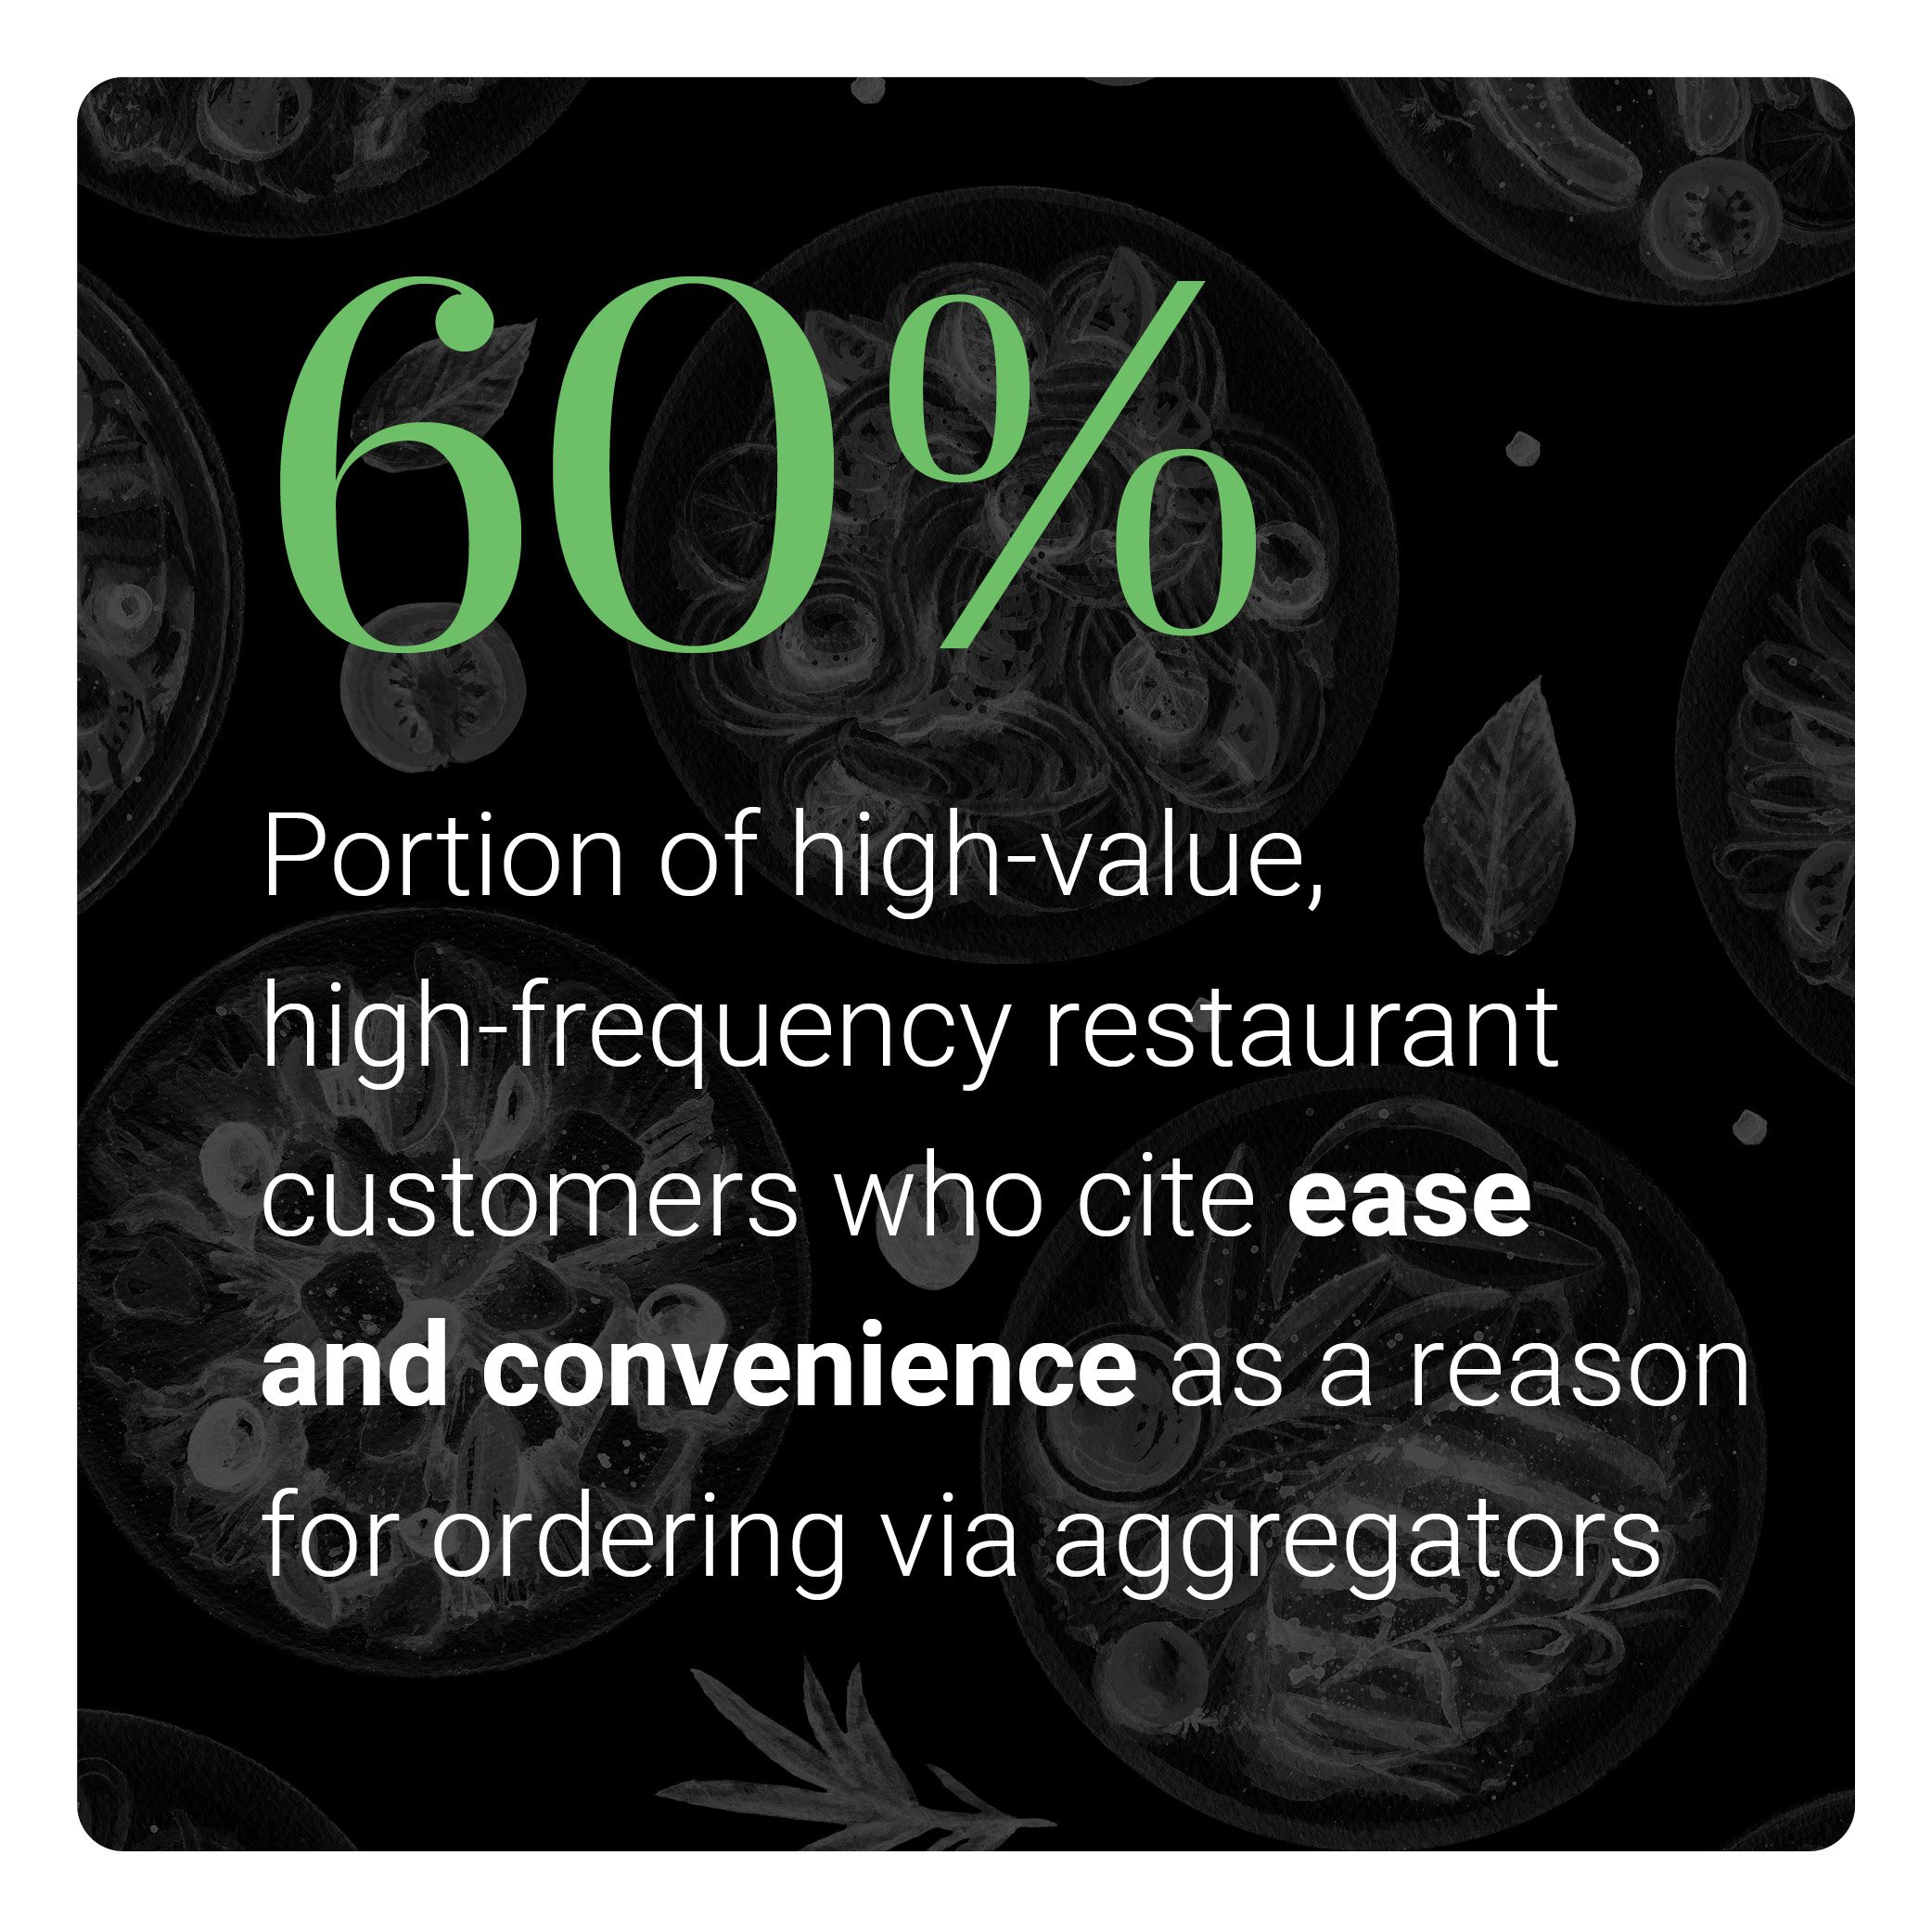 Many high-value, high-frequency restaurant customers order through aggregators because of ease and convenience